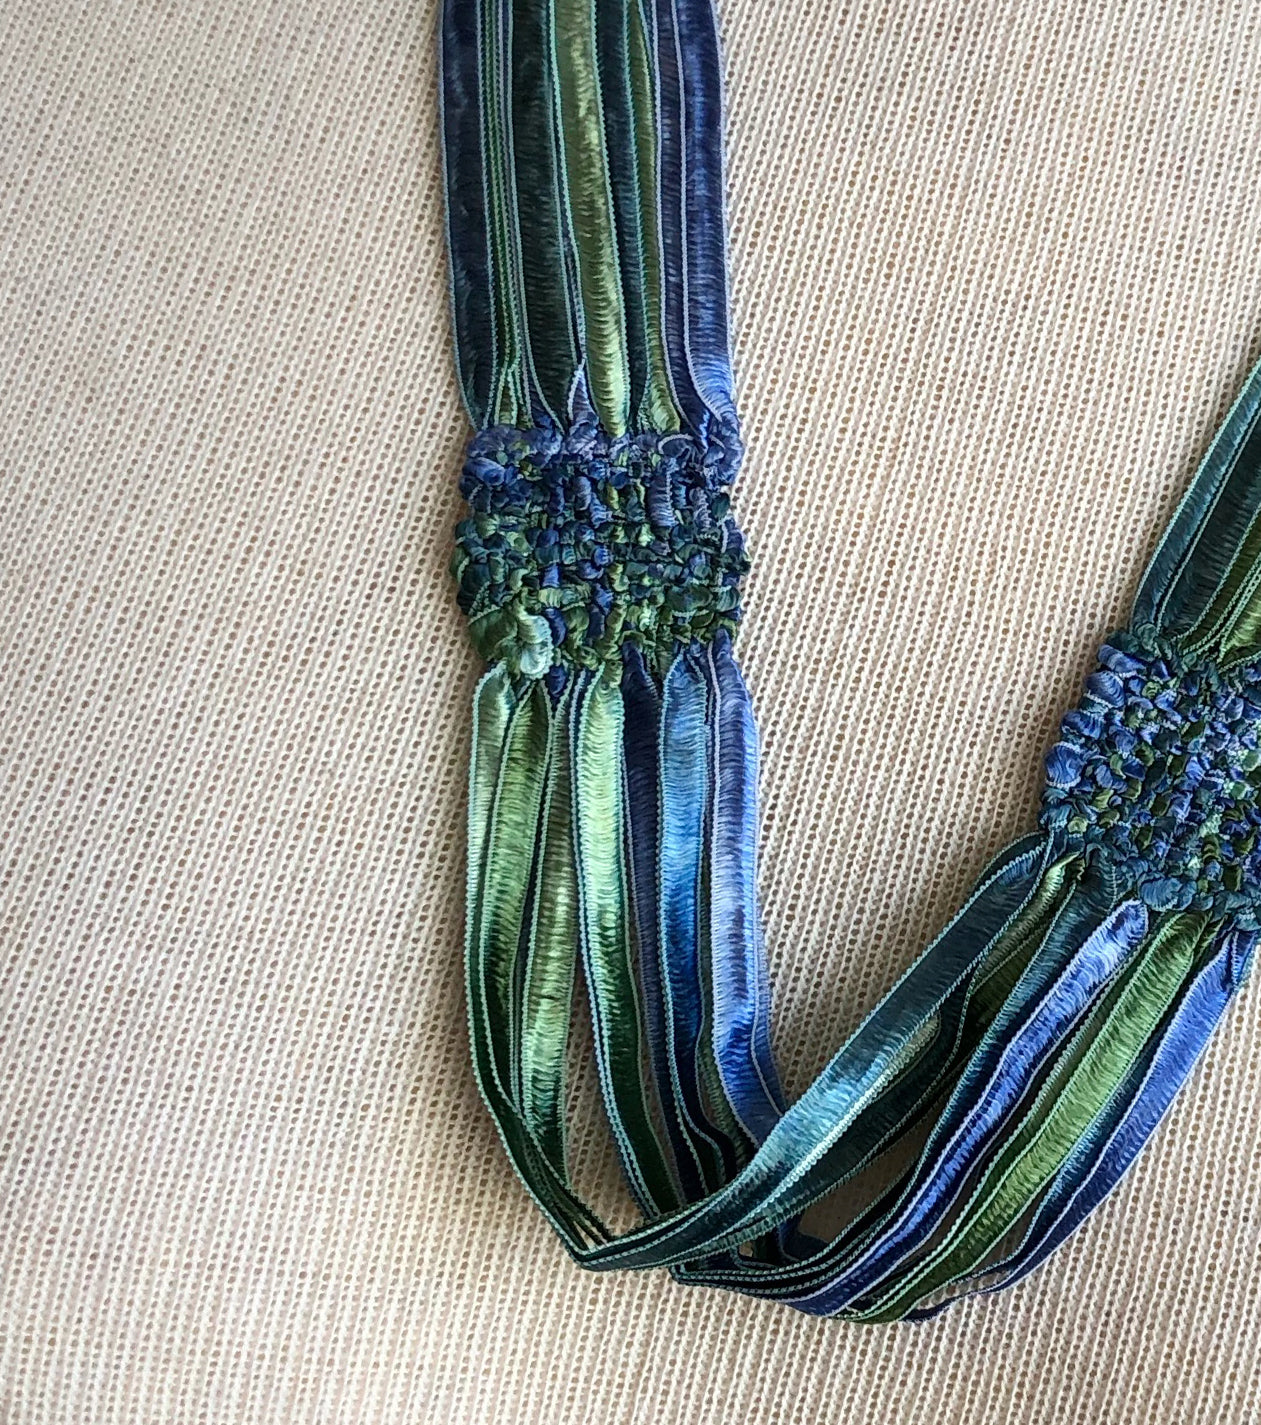 Handwoven Ribbon Necklace - Blues and Greens